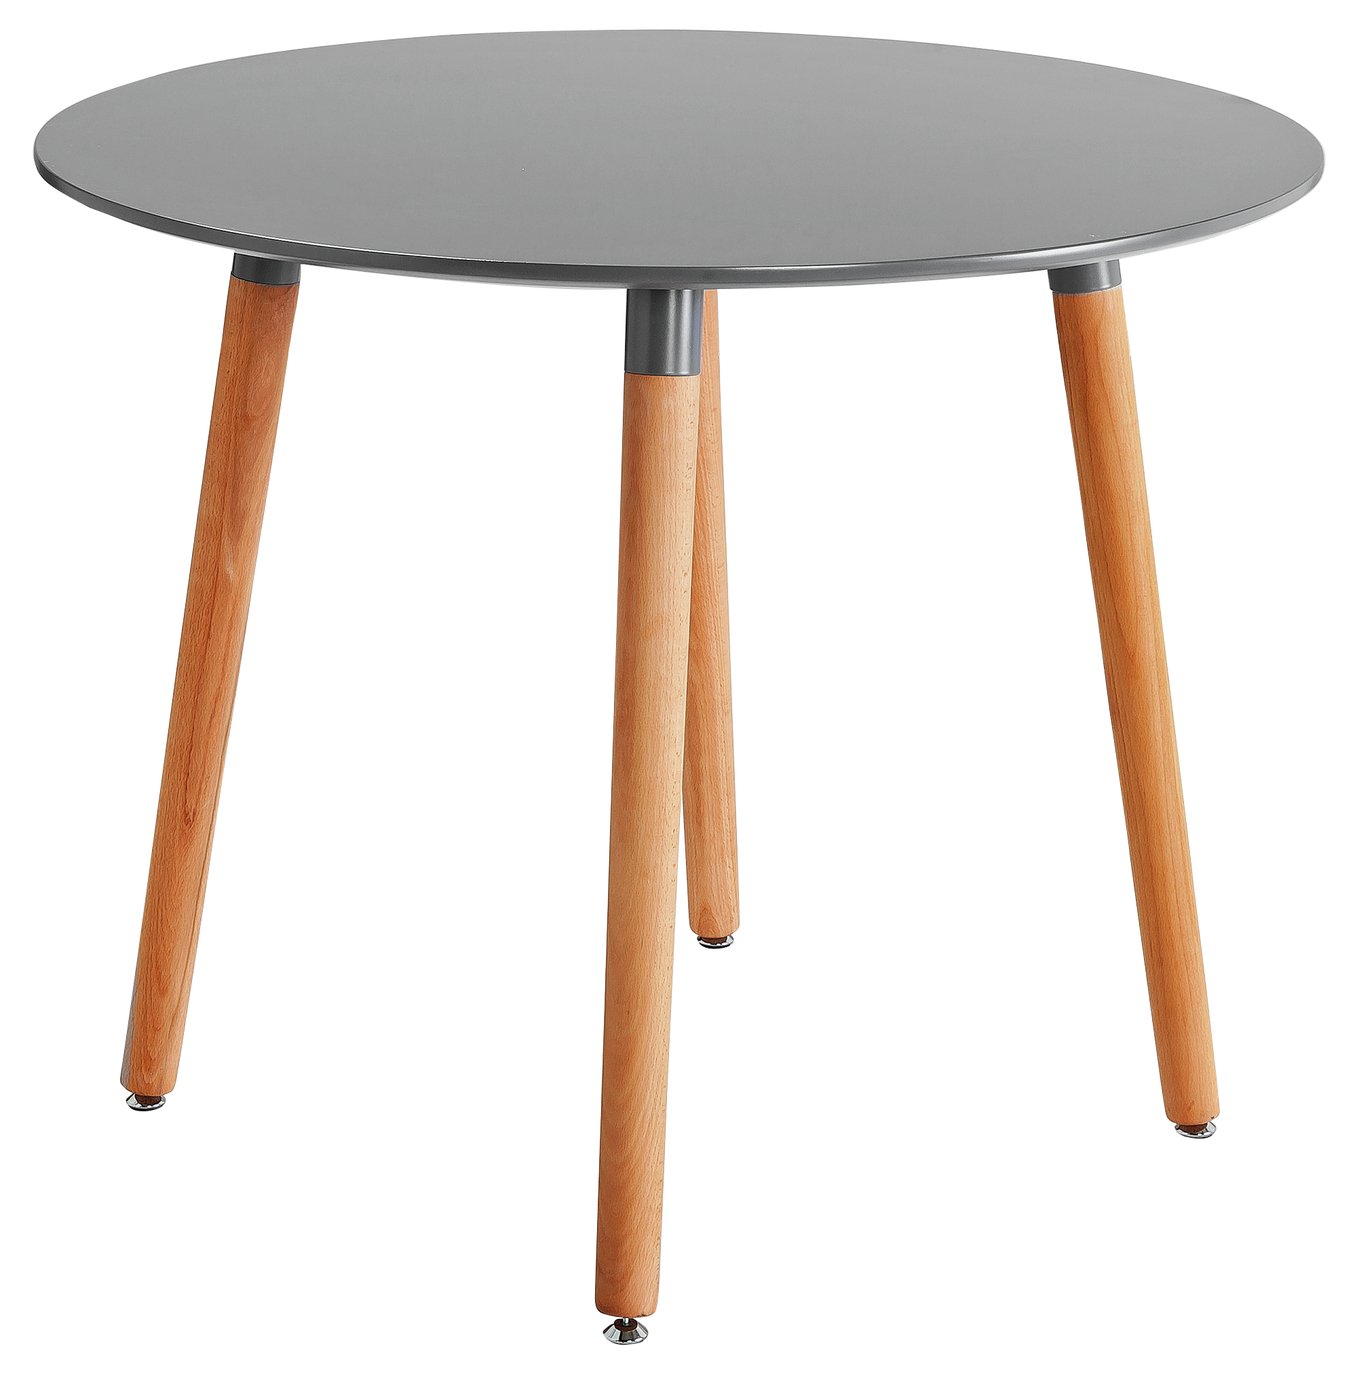 Argos Home Charlie Round 4 Seat Dining Table - Grey